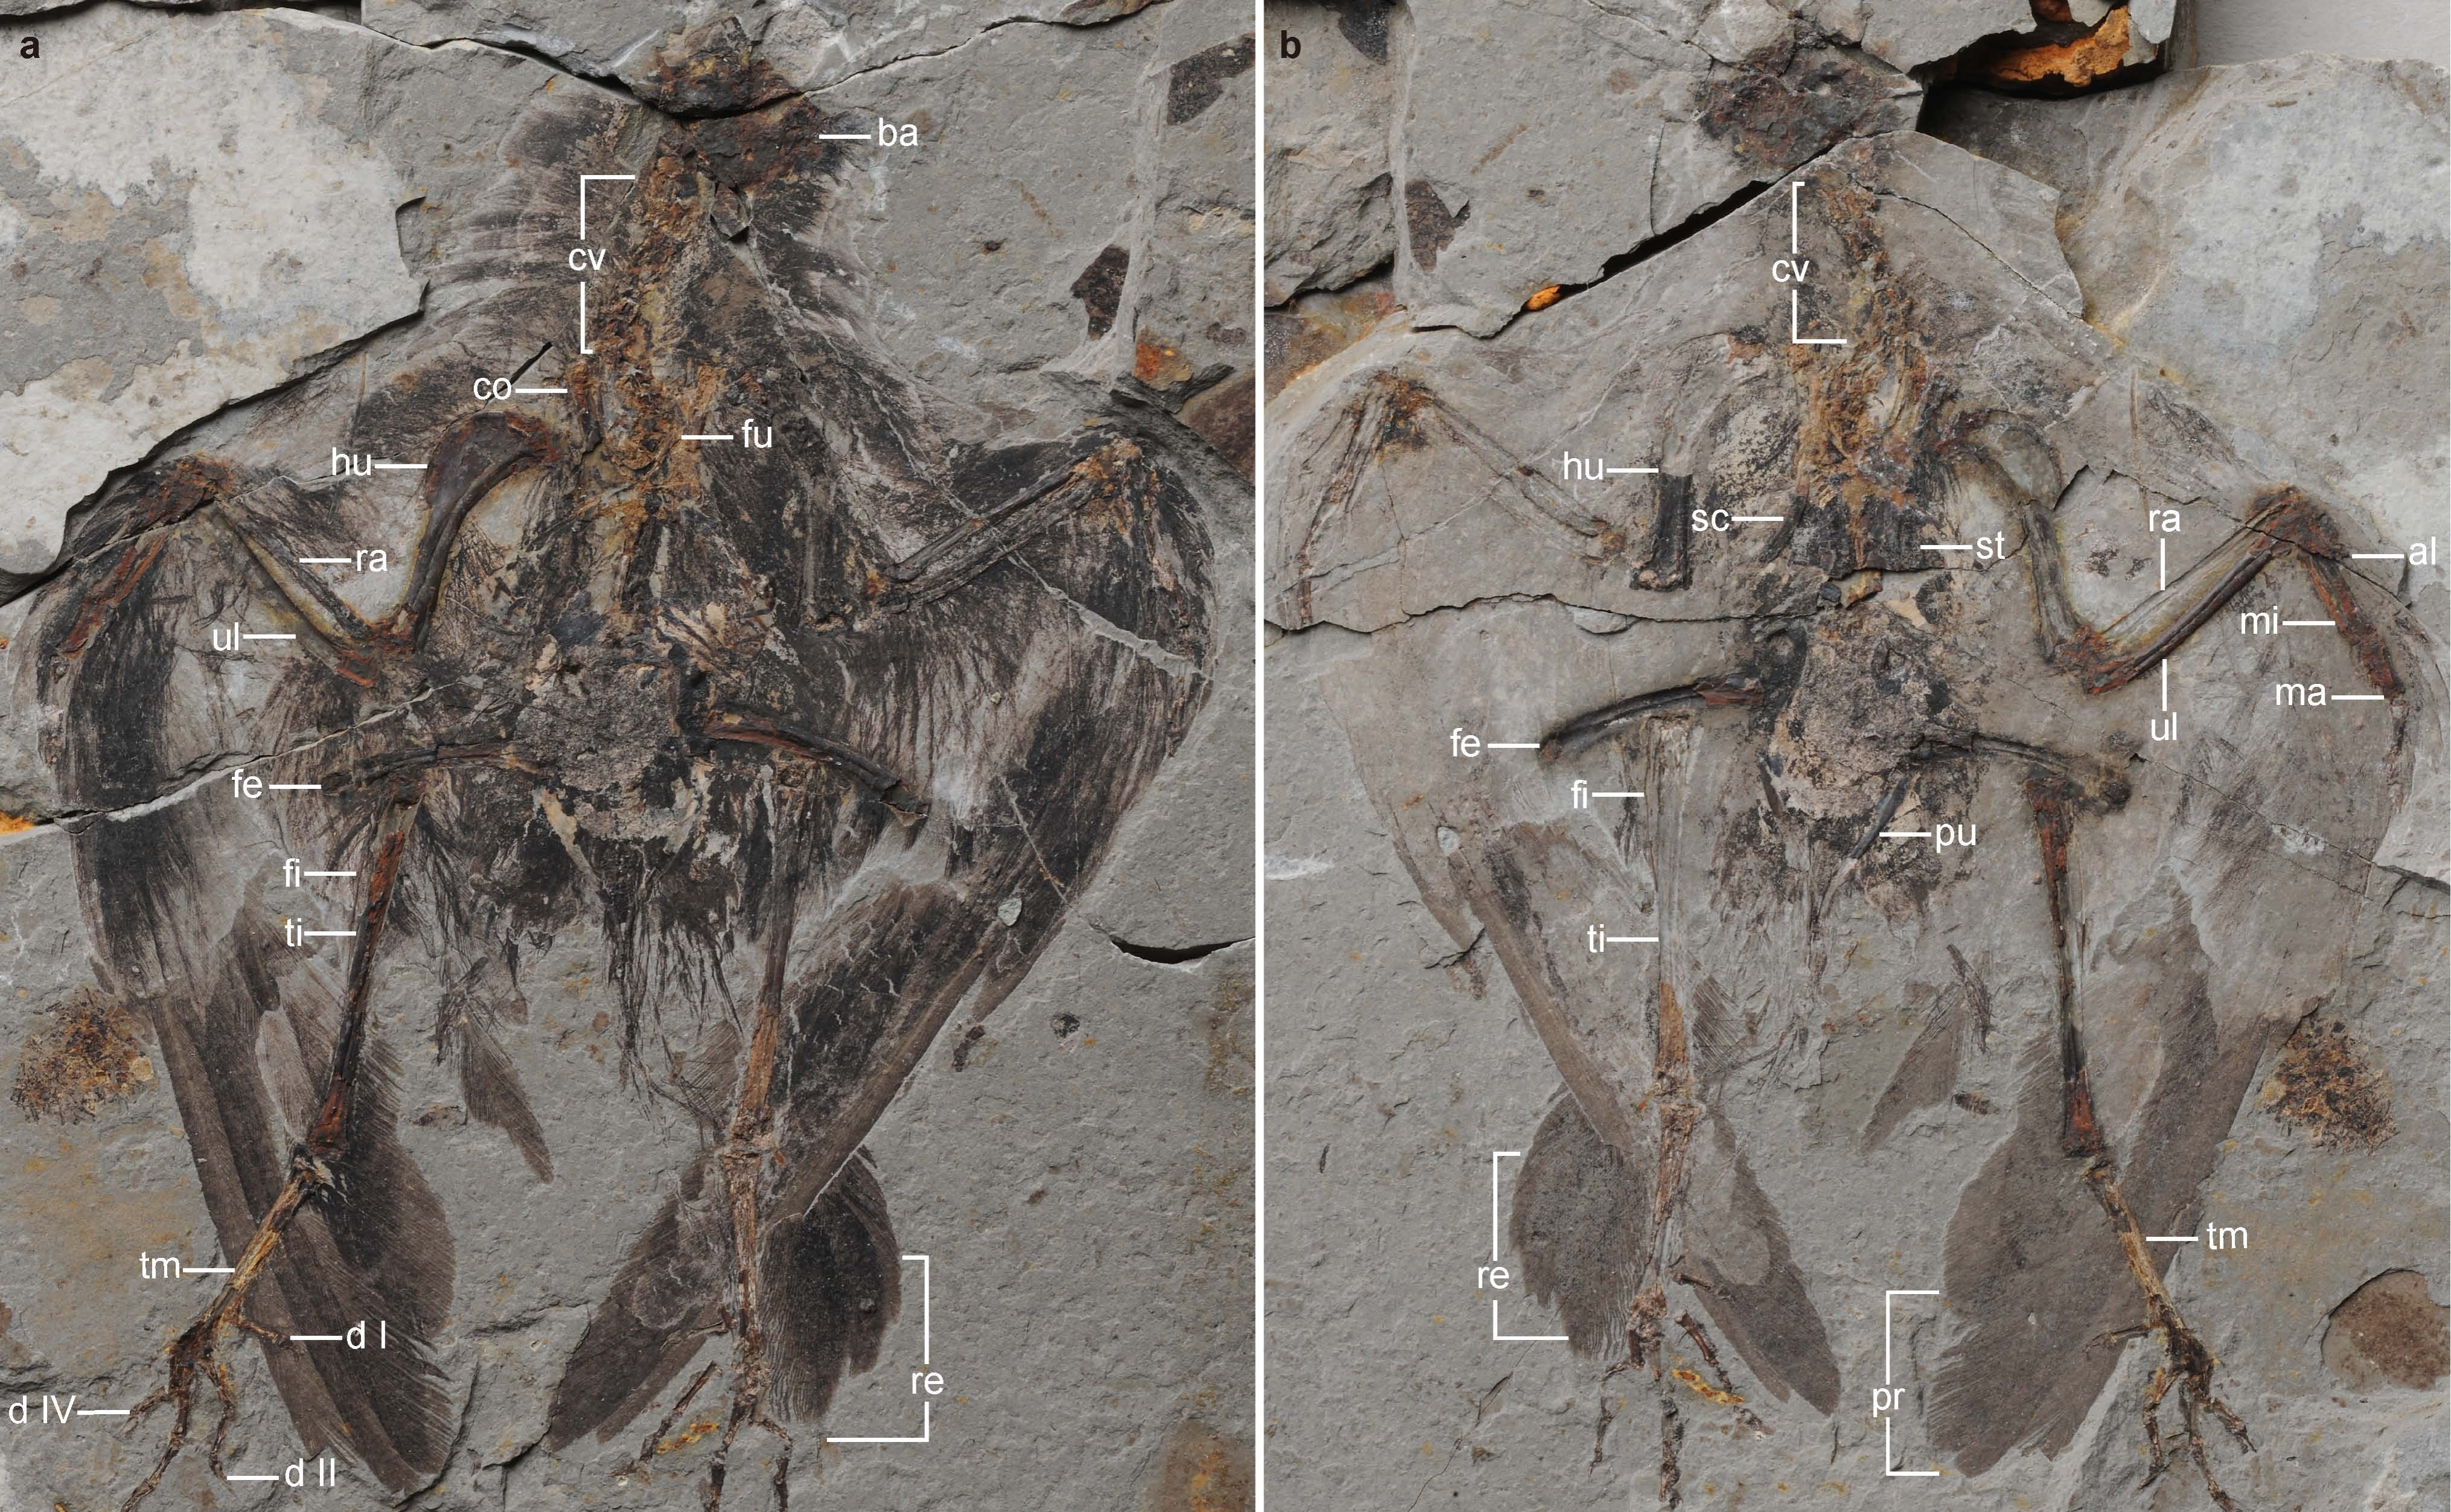 Holotype of Archaeornithura meemannae, the oldest ancestor of modern birds has been dug up in China which evolved almost six million years earlier than previously thought. (National News—Zuma Press)